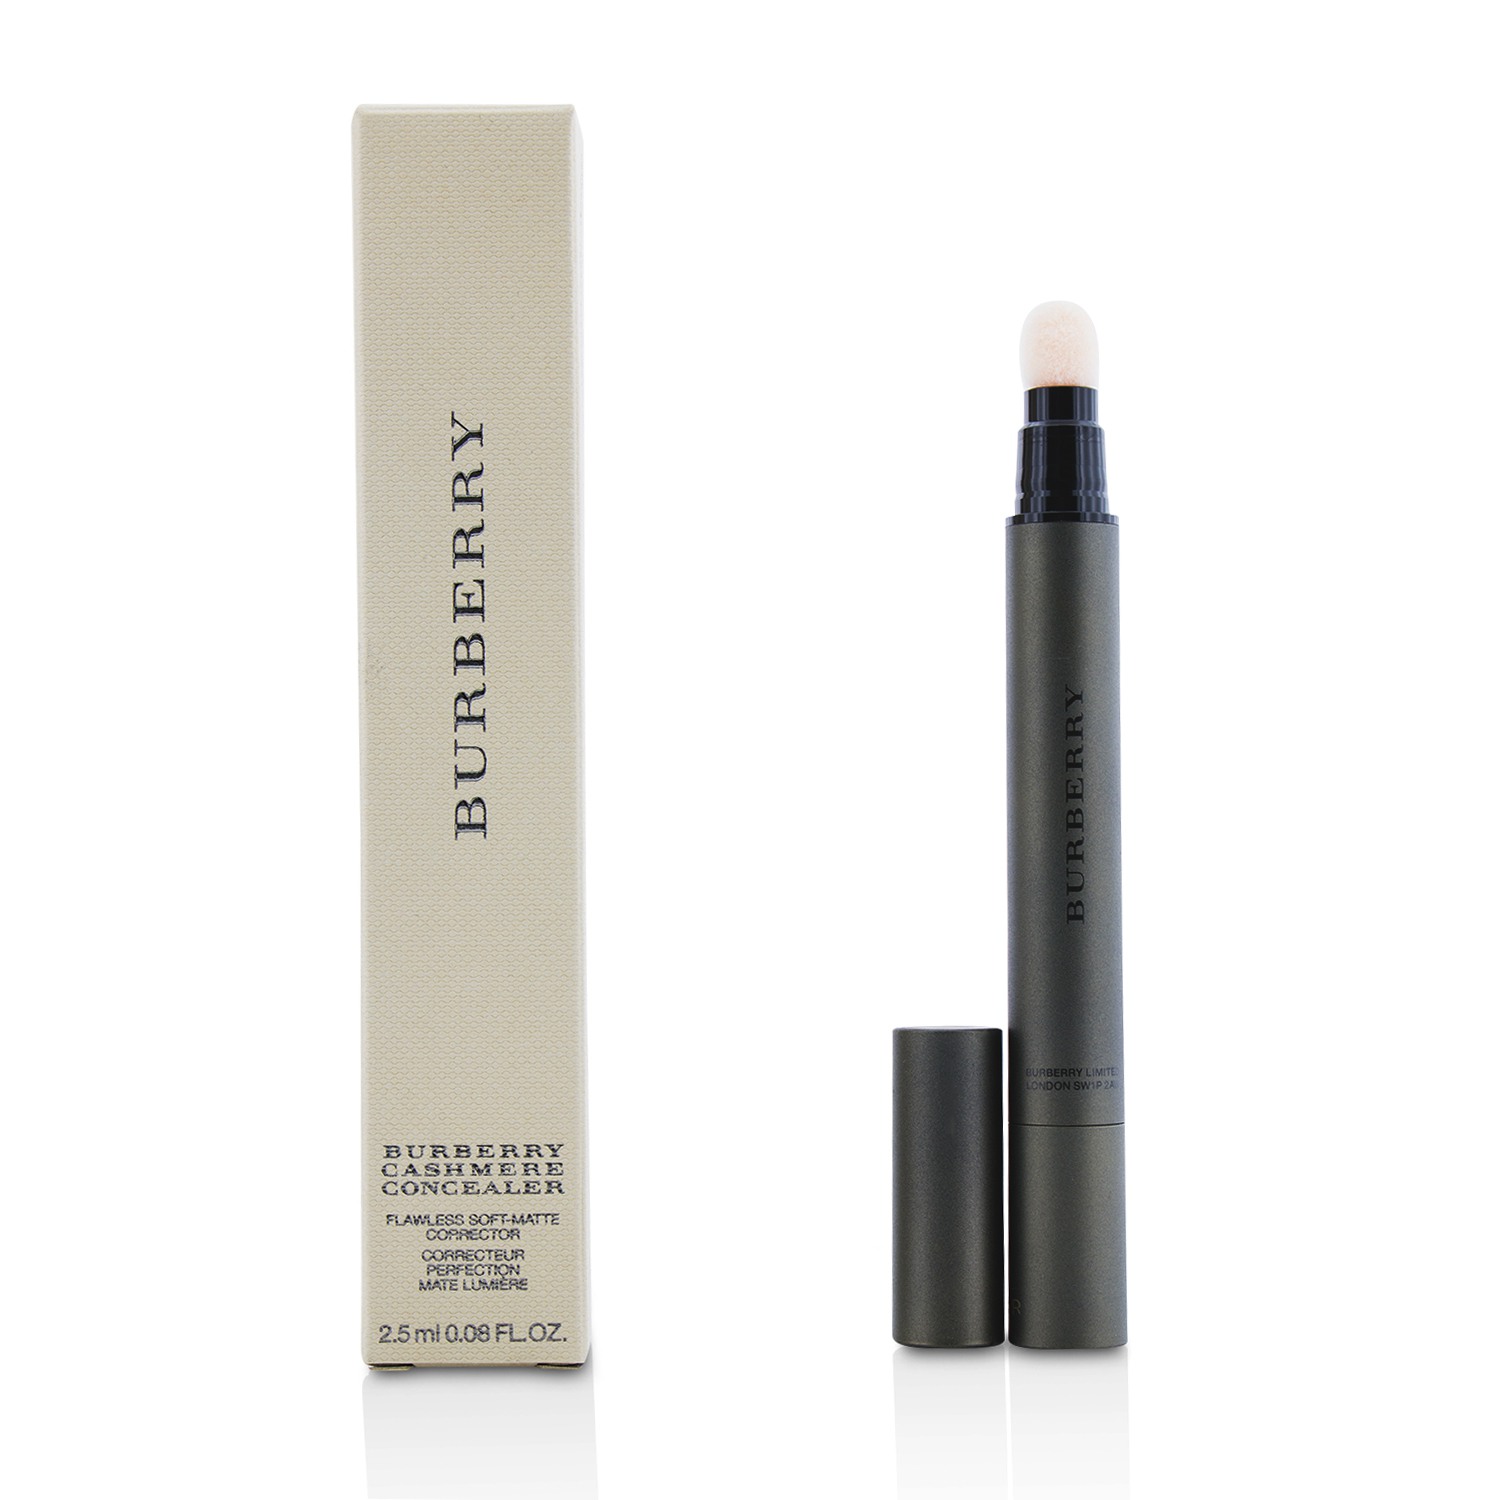 Burberry Cashmere Flawless Soft Matte Concealer - # No. 06 Warm Nude Burberry Image